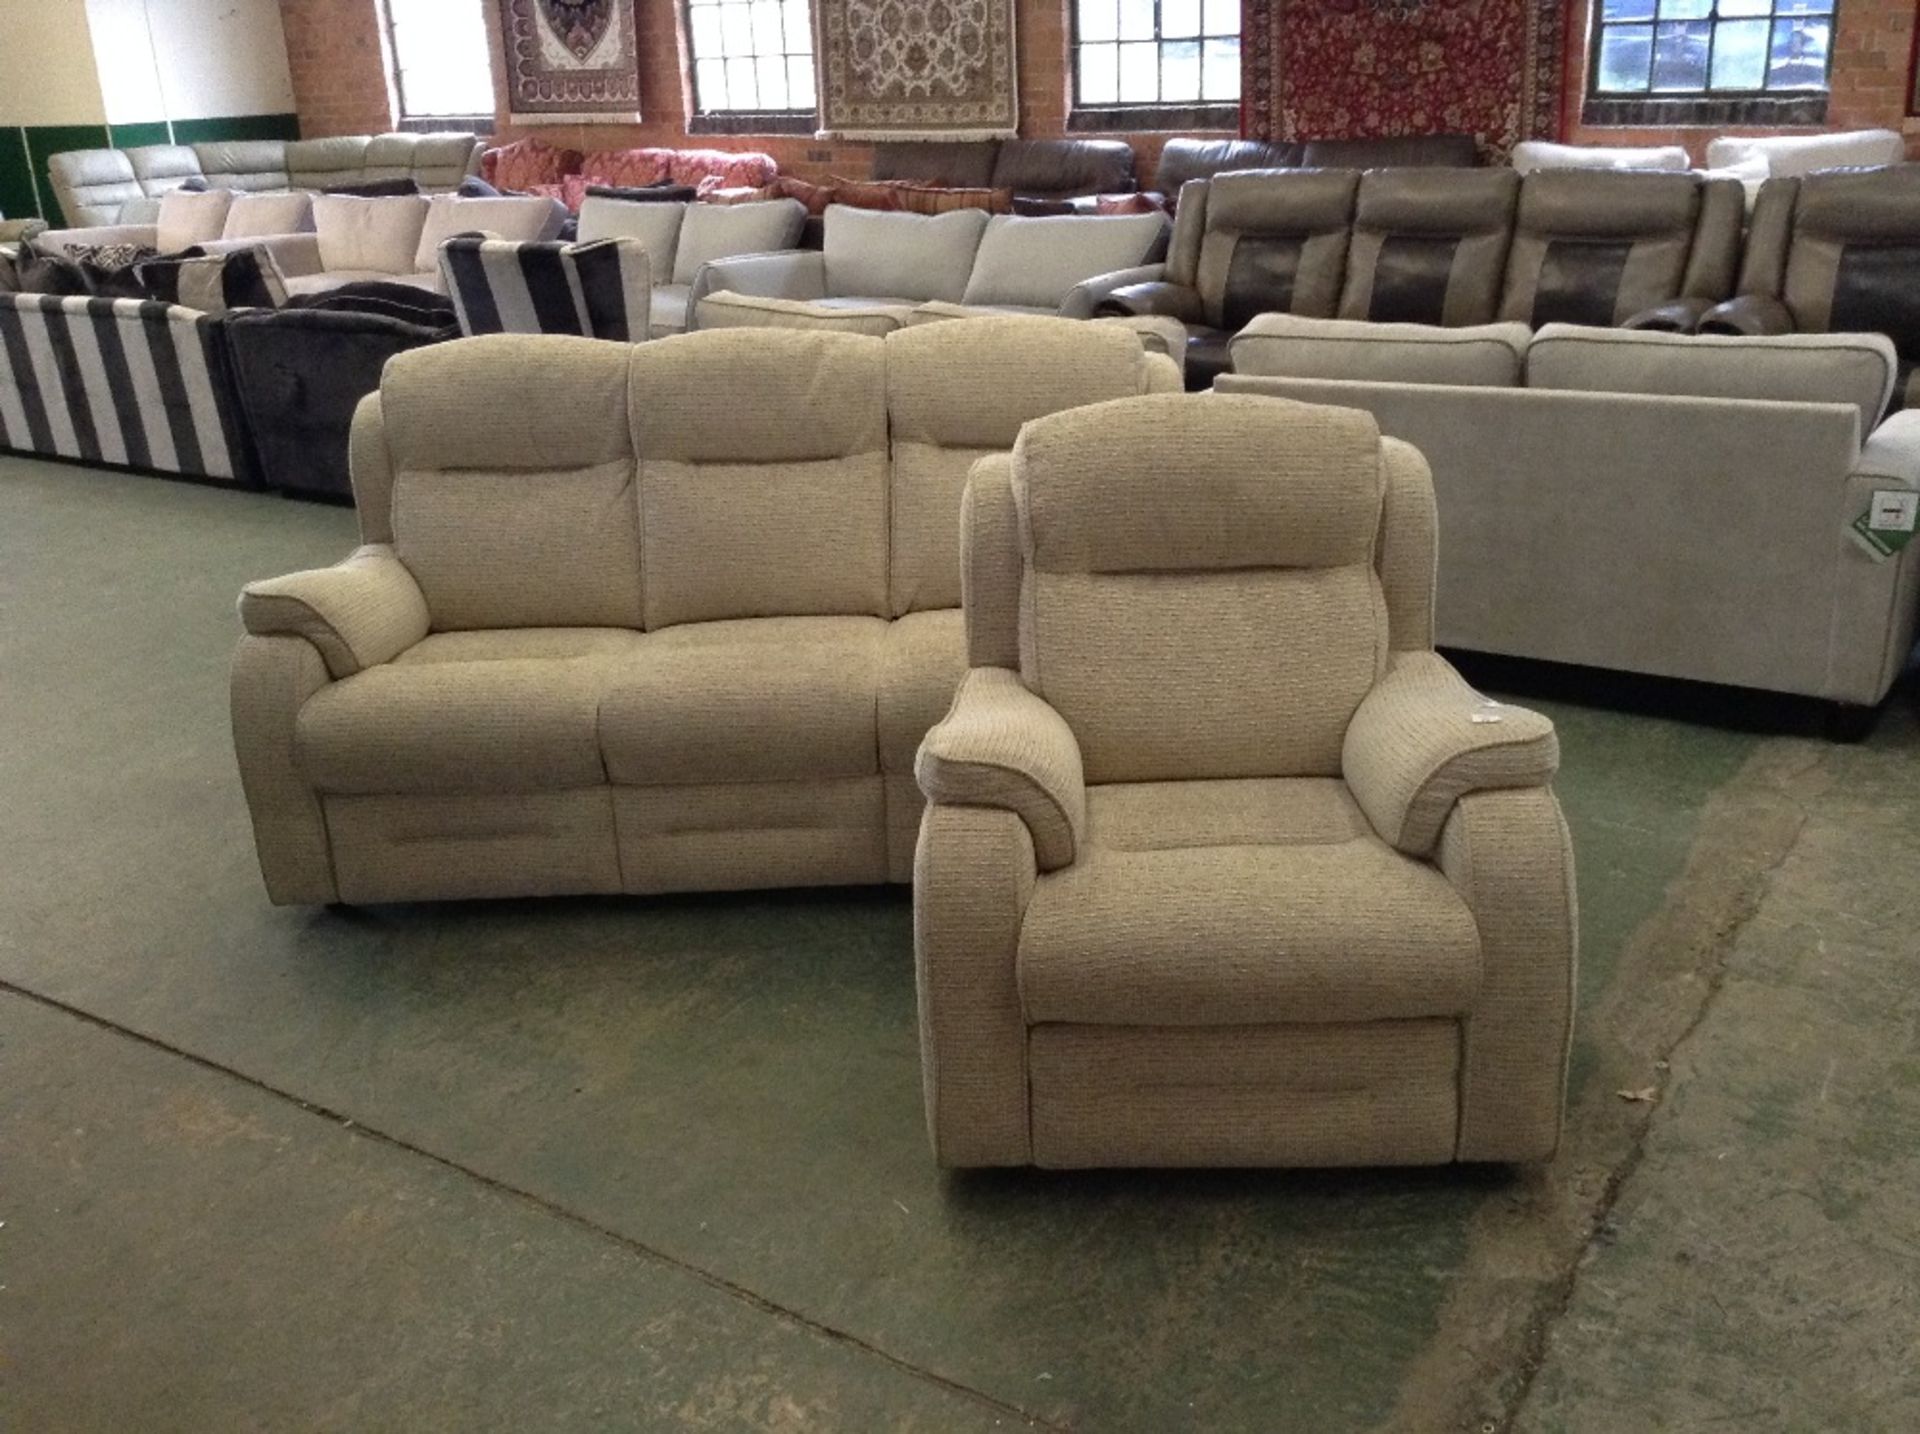 BISCUIT 3 SEATER SOFA AND CHAIR (TR000871 WO021891